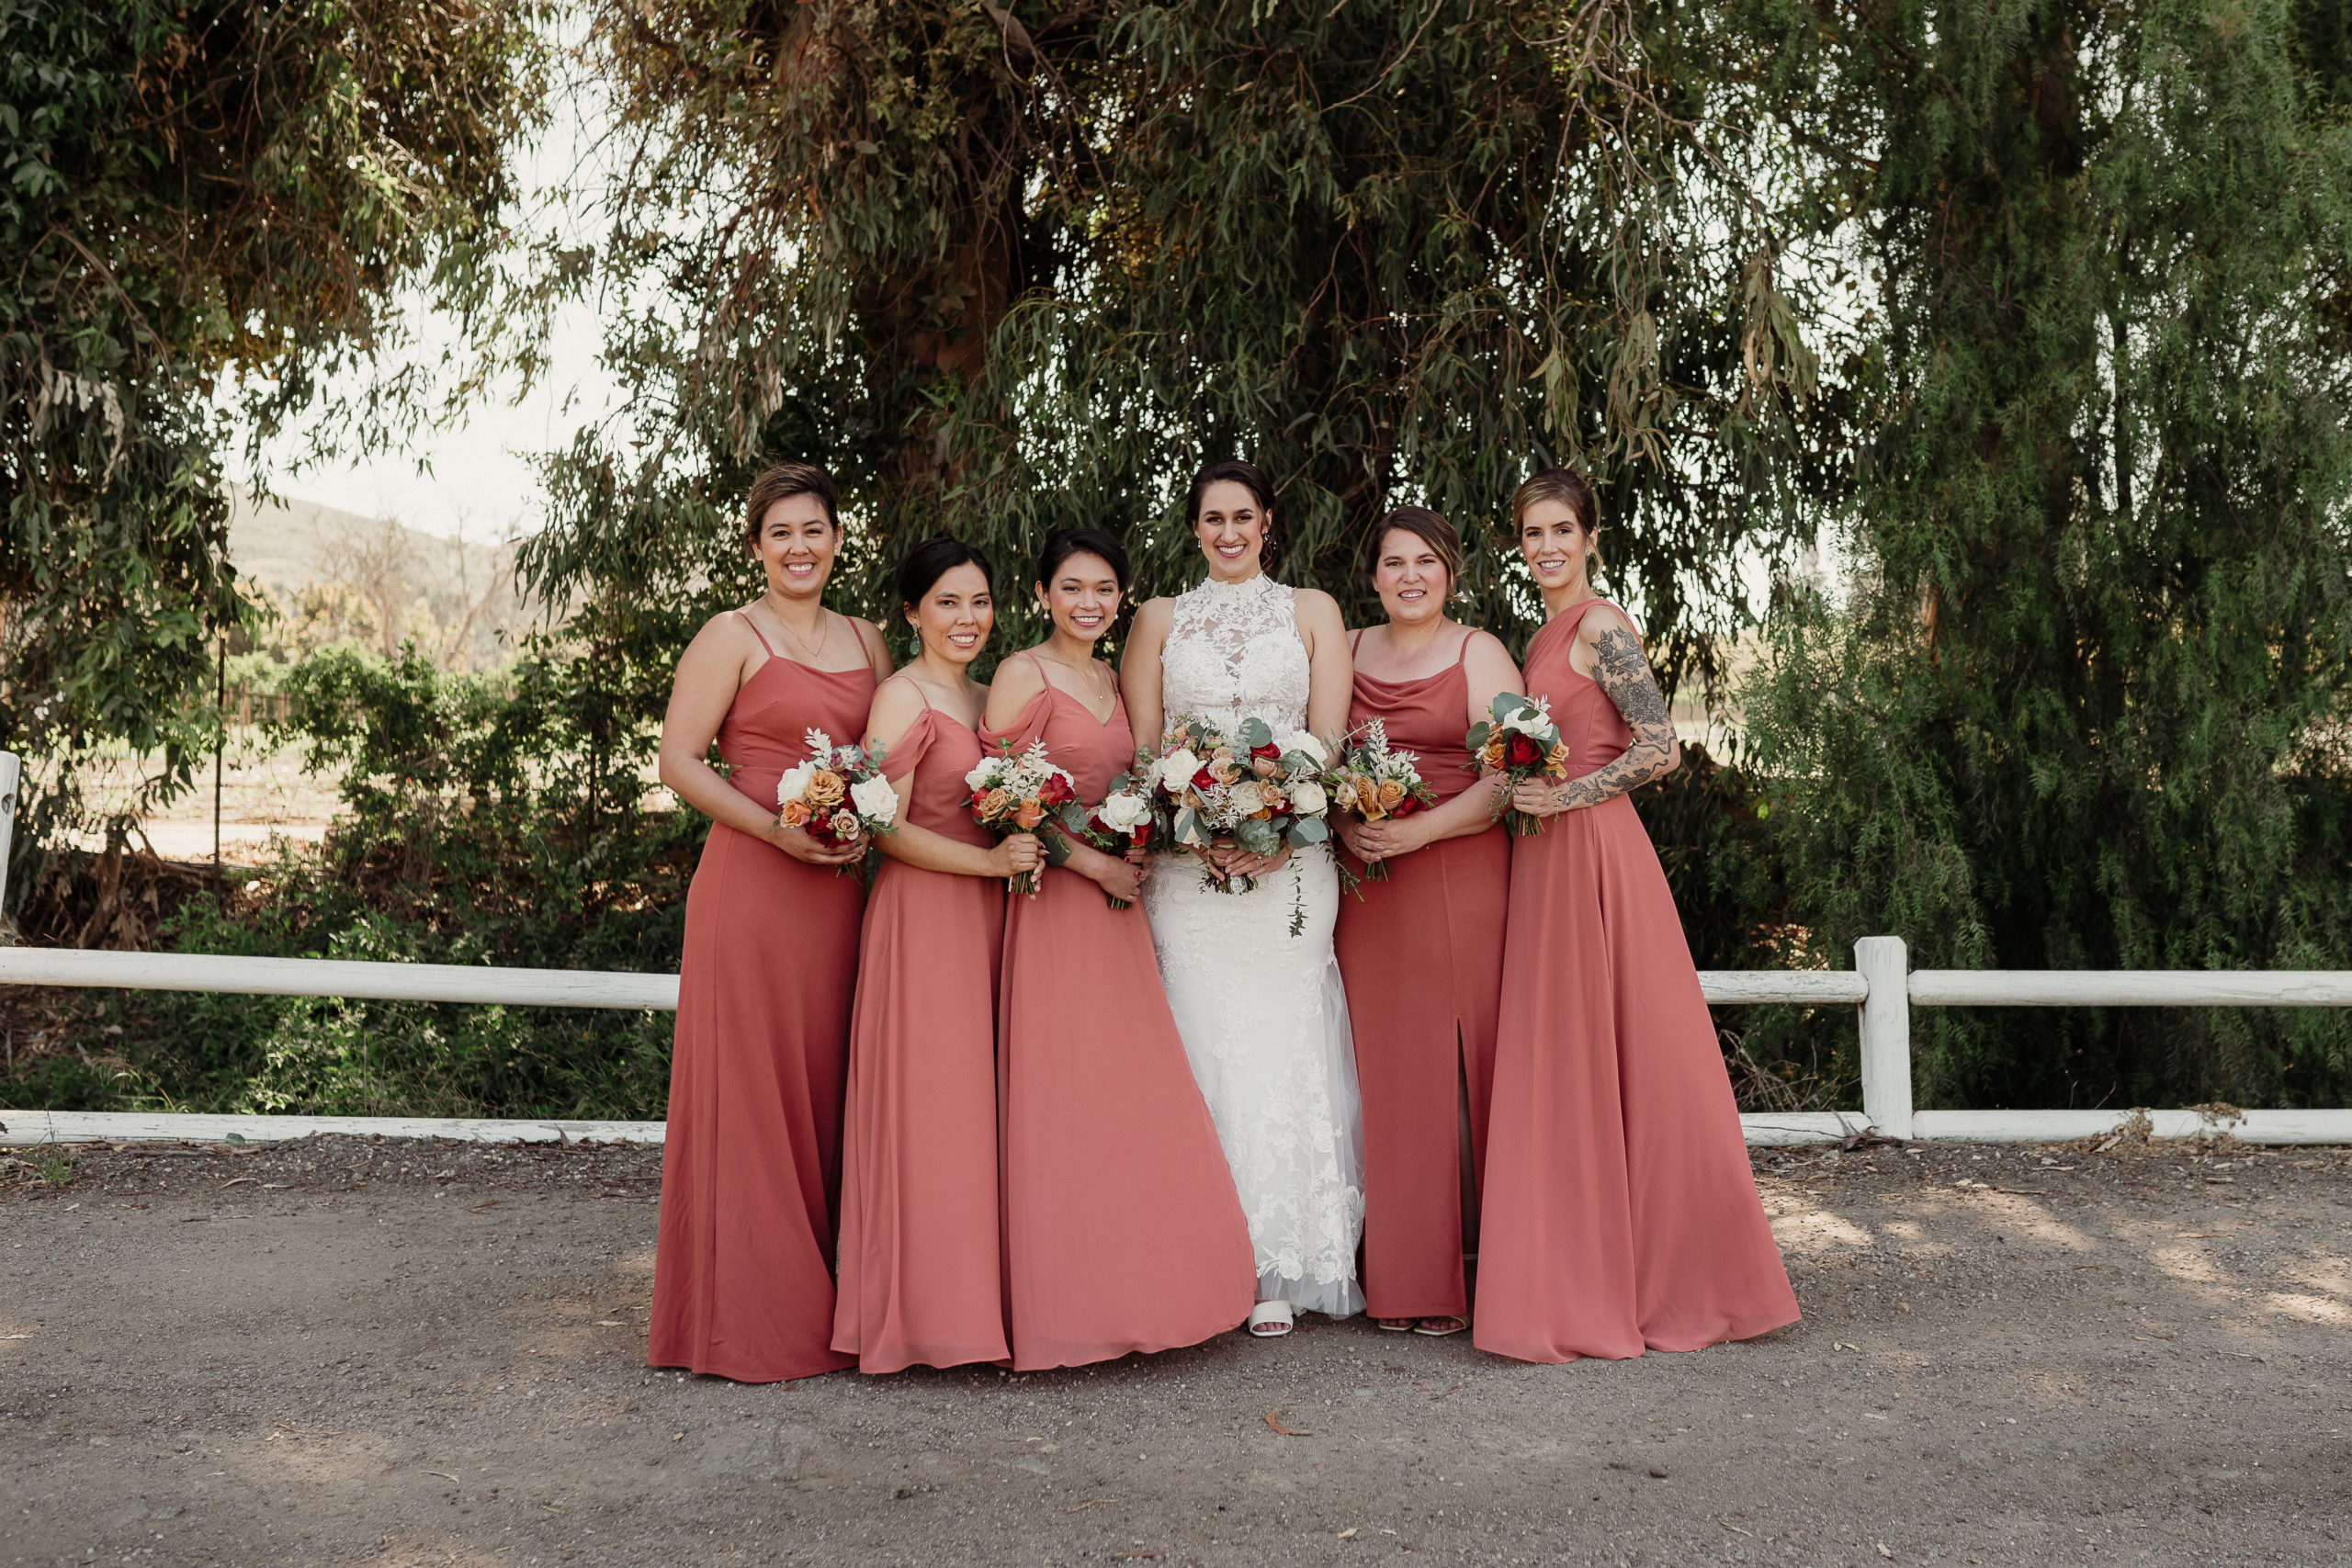 bride wearing a white gown and bridesmaids wearing terracotta dresses hold white rose and eucalyptus bouquets and pose in a line on the road in front of tall eucalyptus trees at walnut grove weddings in moorpark